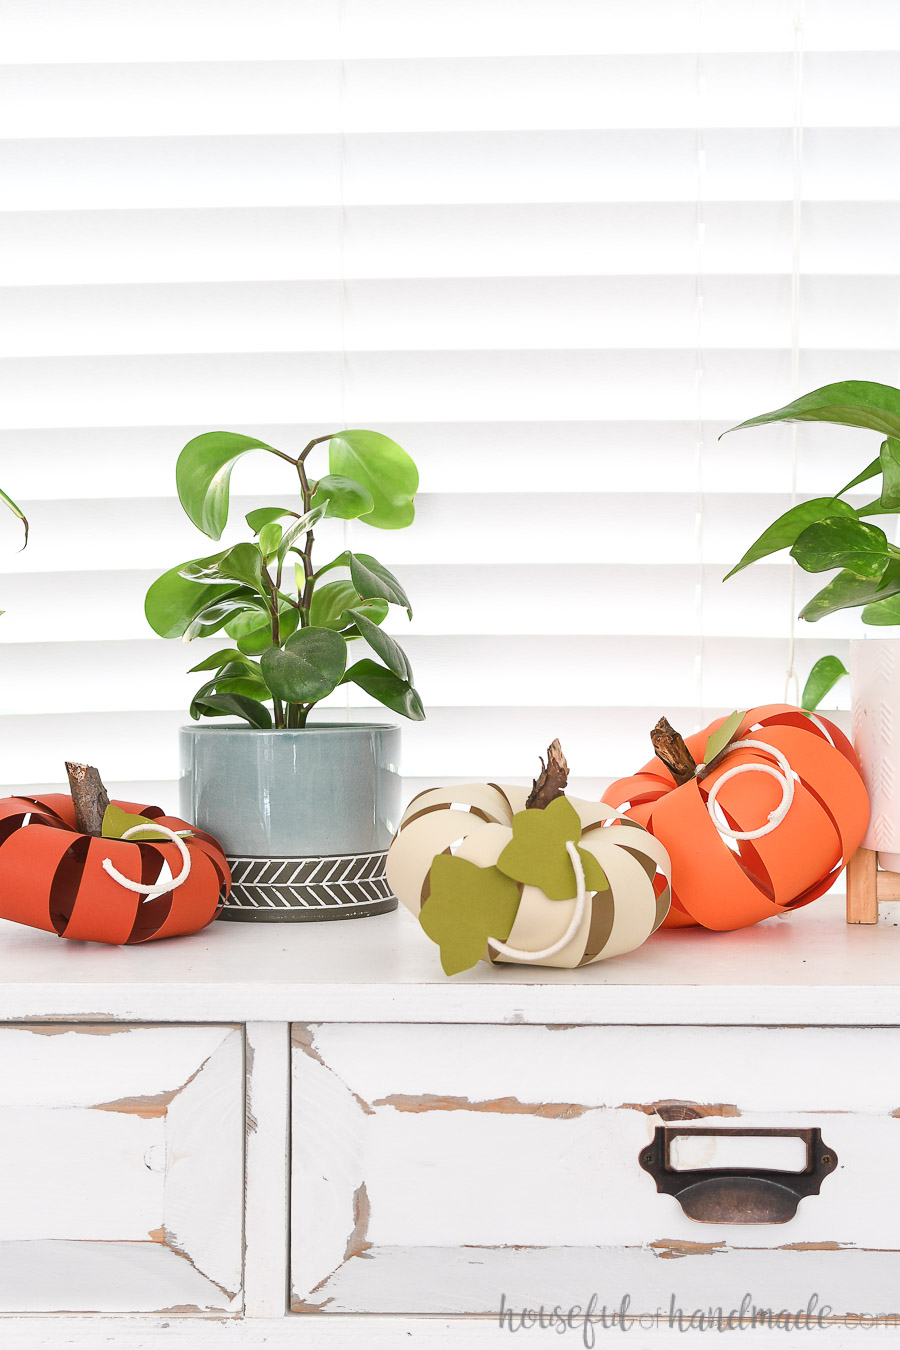 Console table with 3 paper pumpkins in oranges and cream next to two potted house plants.